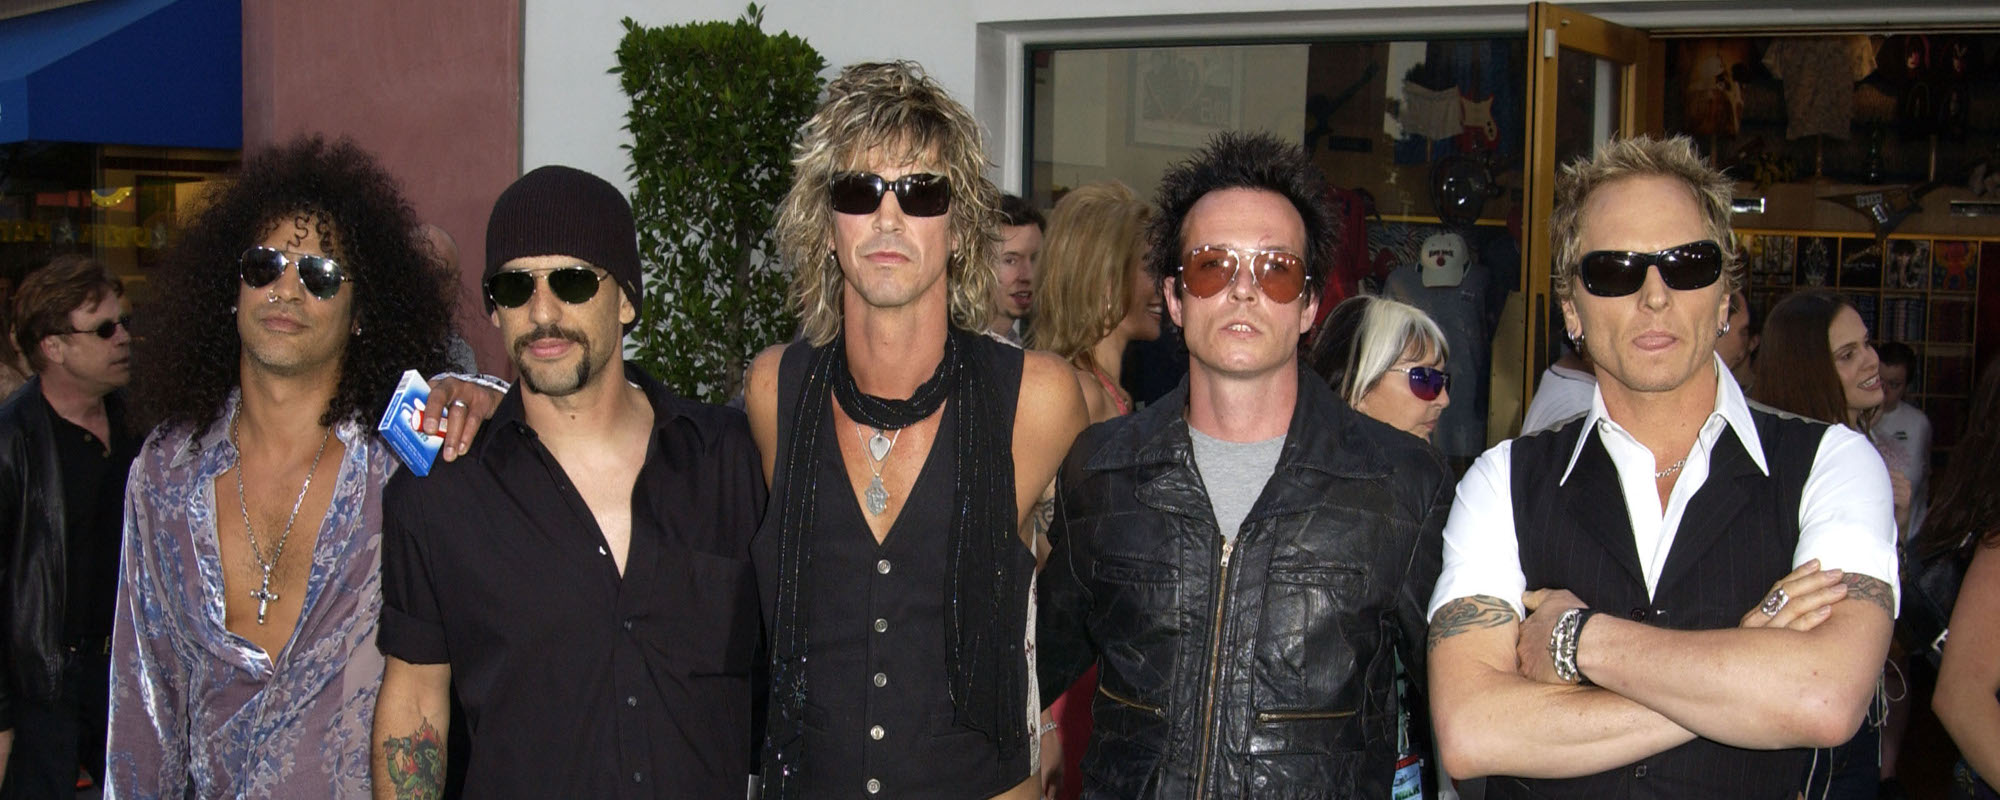 Meaning Behind the Band Name of the Rock Supergroup Velvet Revolver